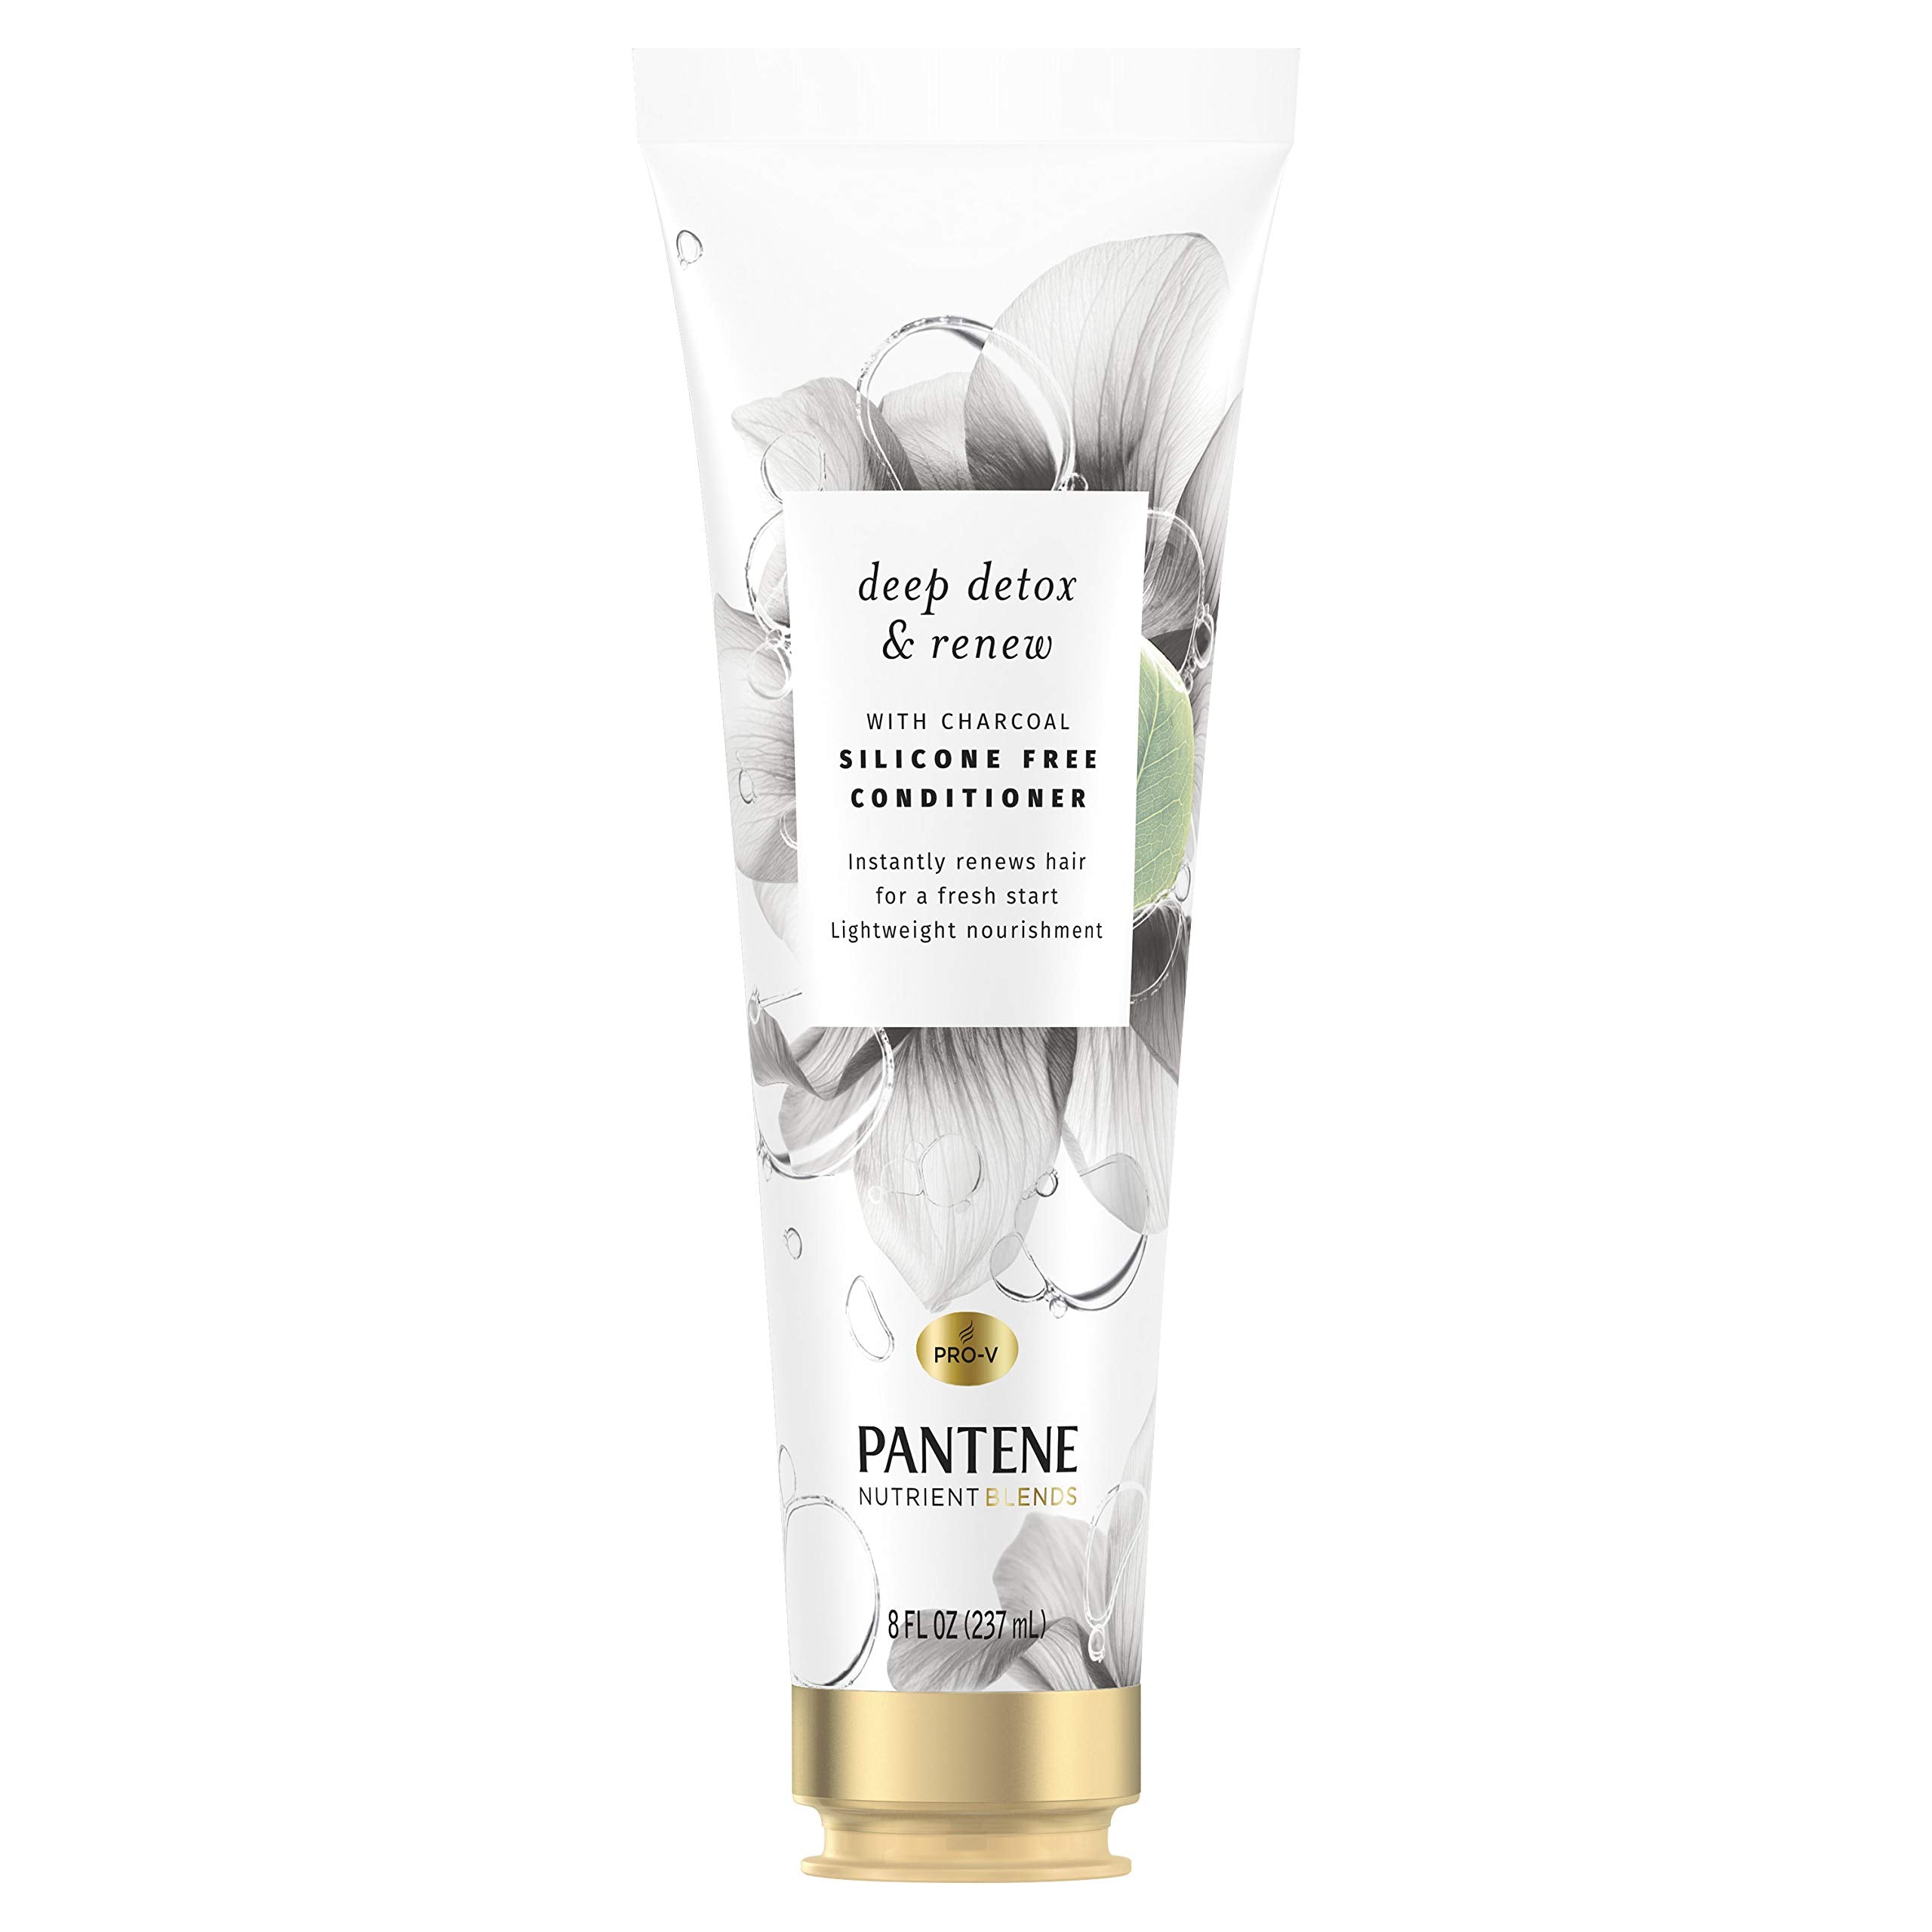 Pantene Nutrient Blends Deep Detox & Renew Clarifying Silicone Free Charcoal Conditioner, 8 Fl Oz